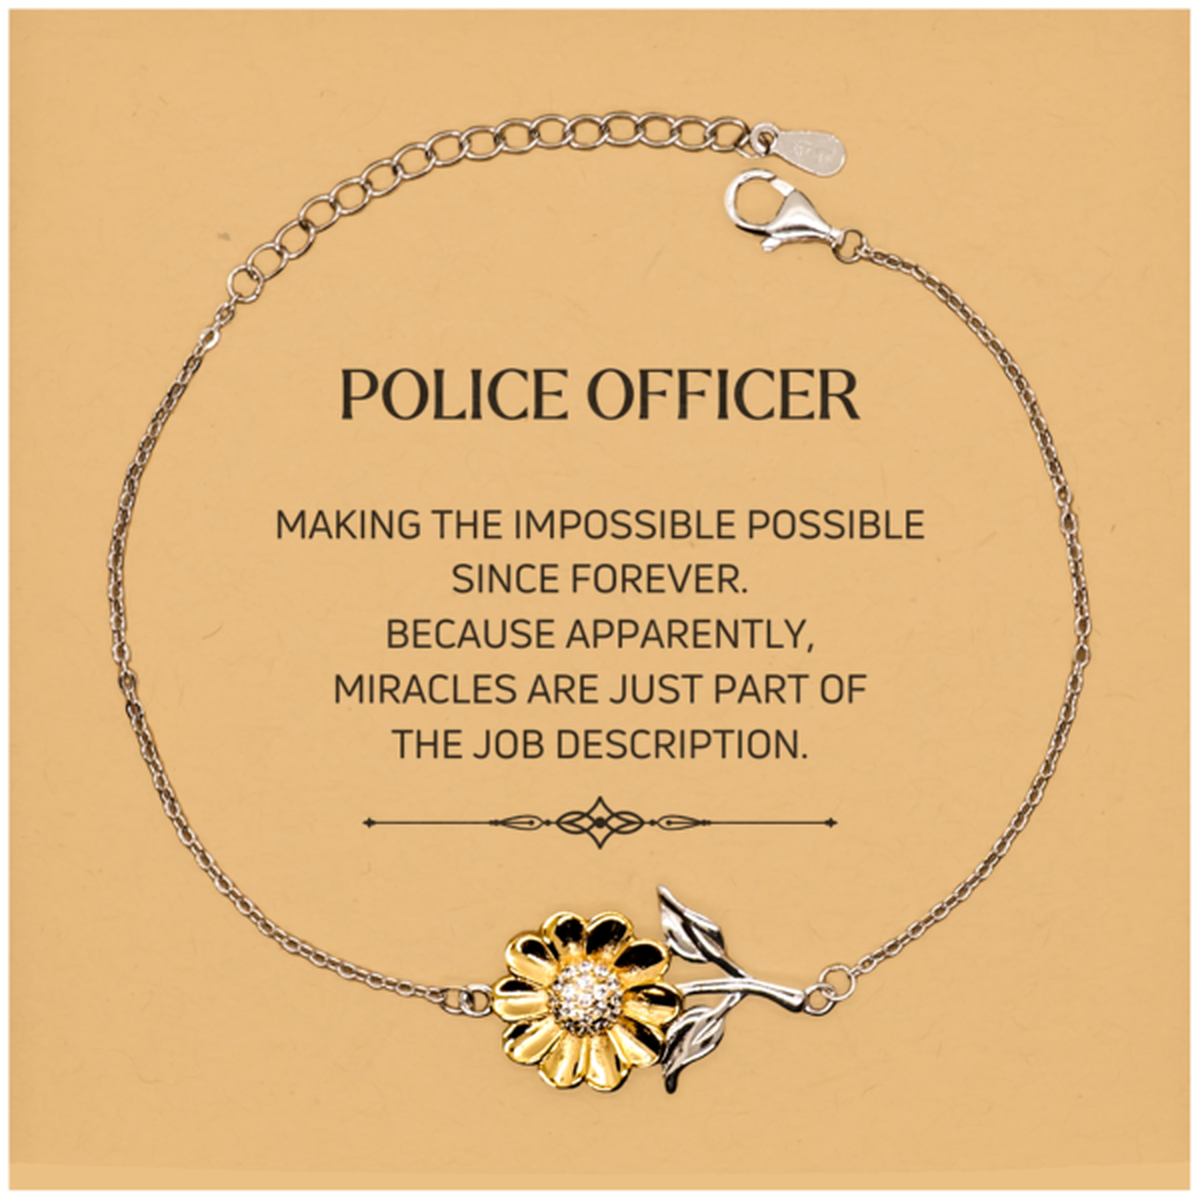 Funny Police Officer Gifts, Miracles are just part of the job description, Inspirational Birthday Christmas Sunflower Bracelet For Police Officer, Men, Women, Coworkers, Friends, Boss